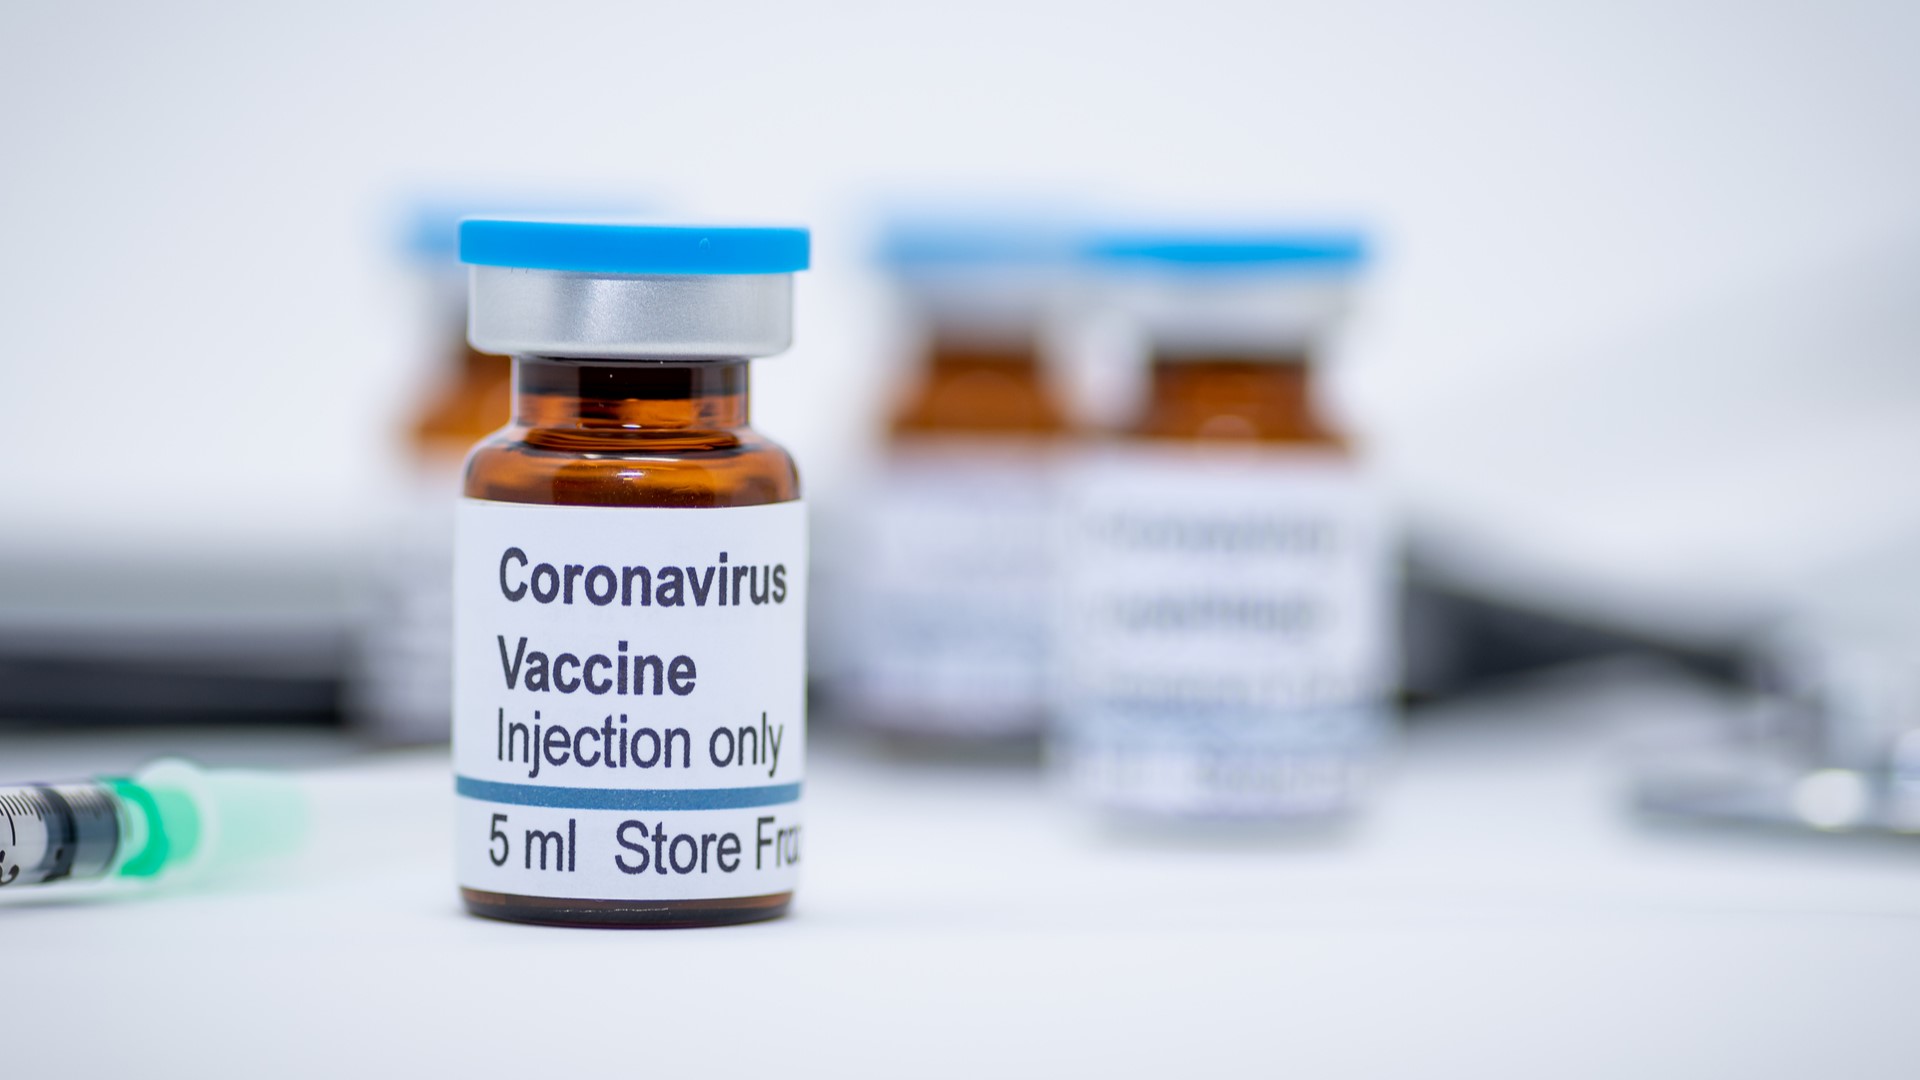 Limited doses of the COVID-19 vaccine mean public health must prioritize and sort out who will get the first doses when it's shipped.